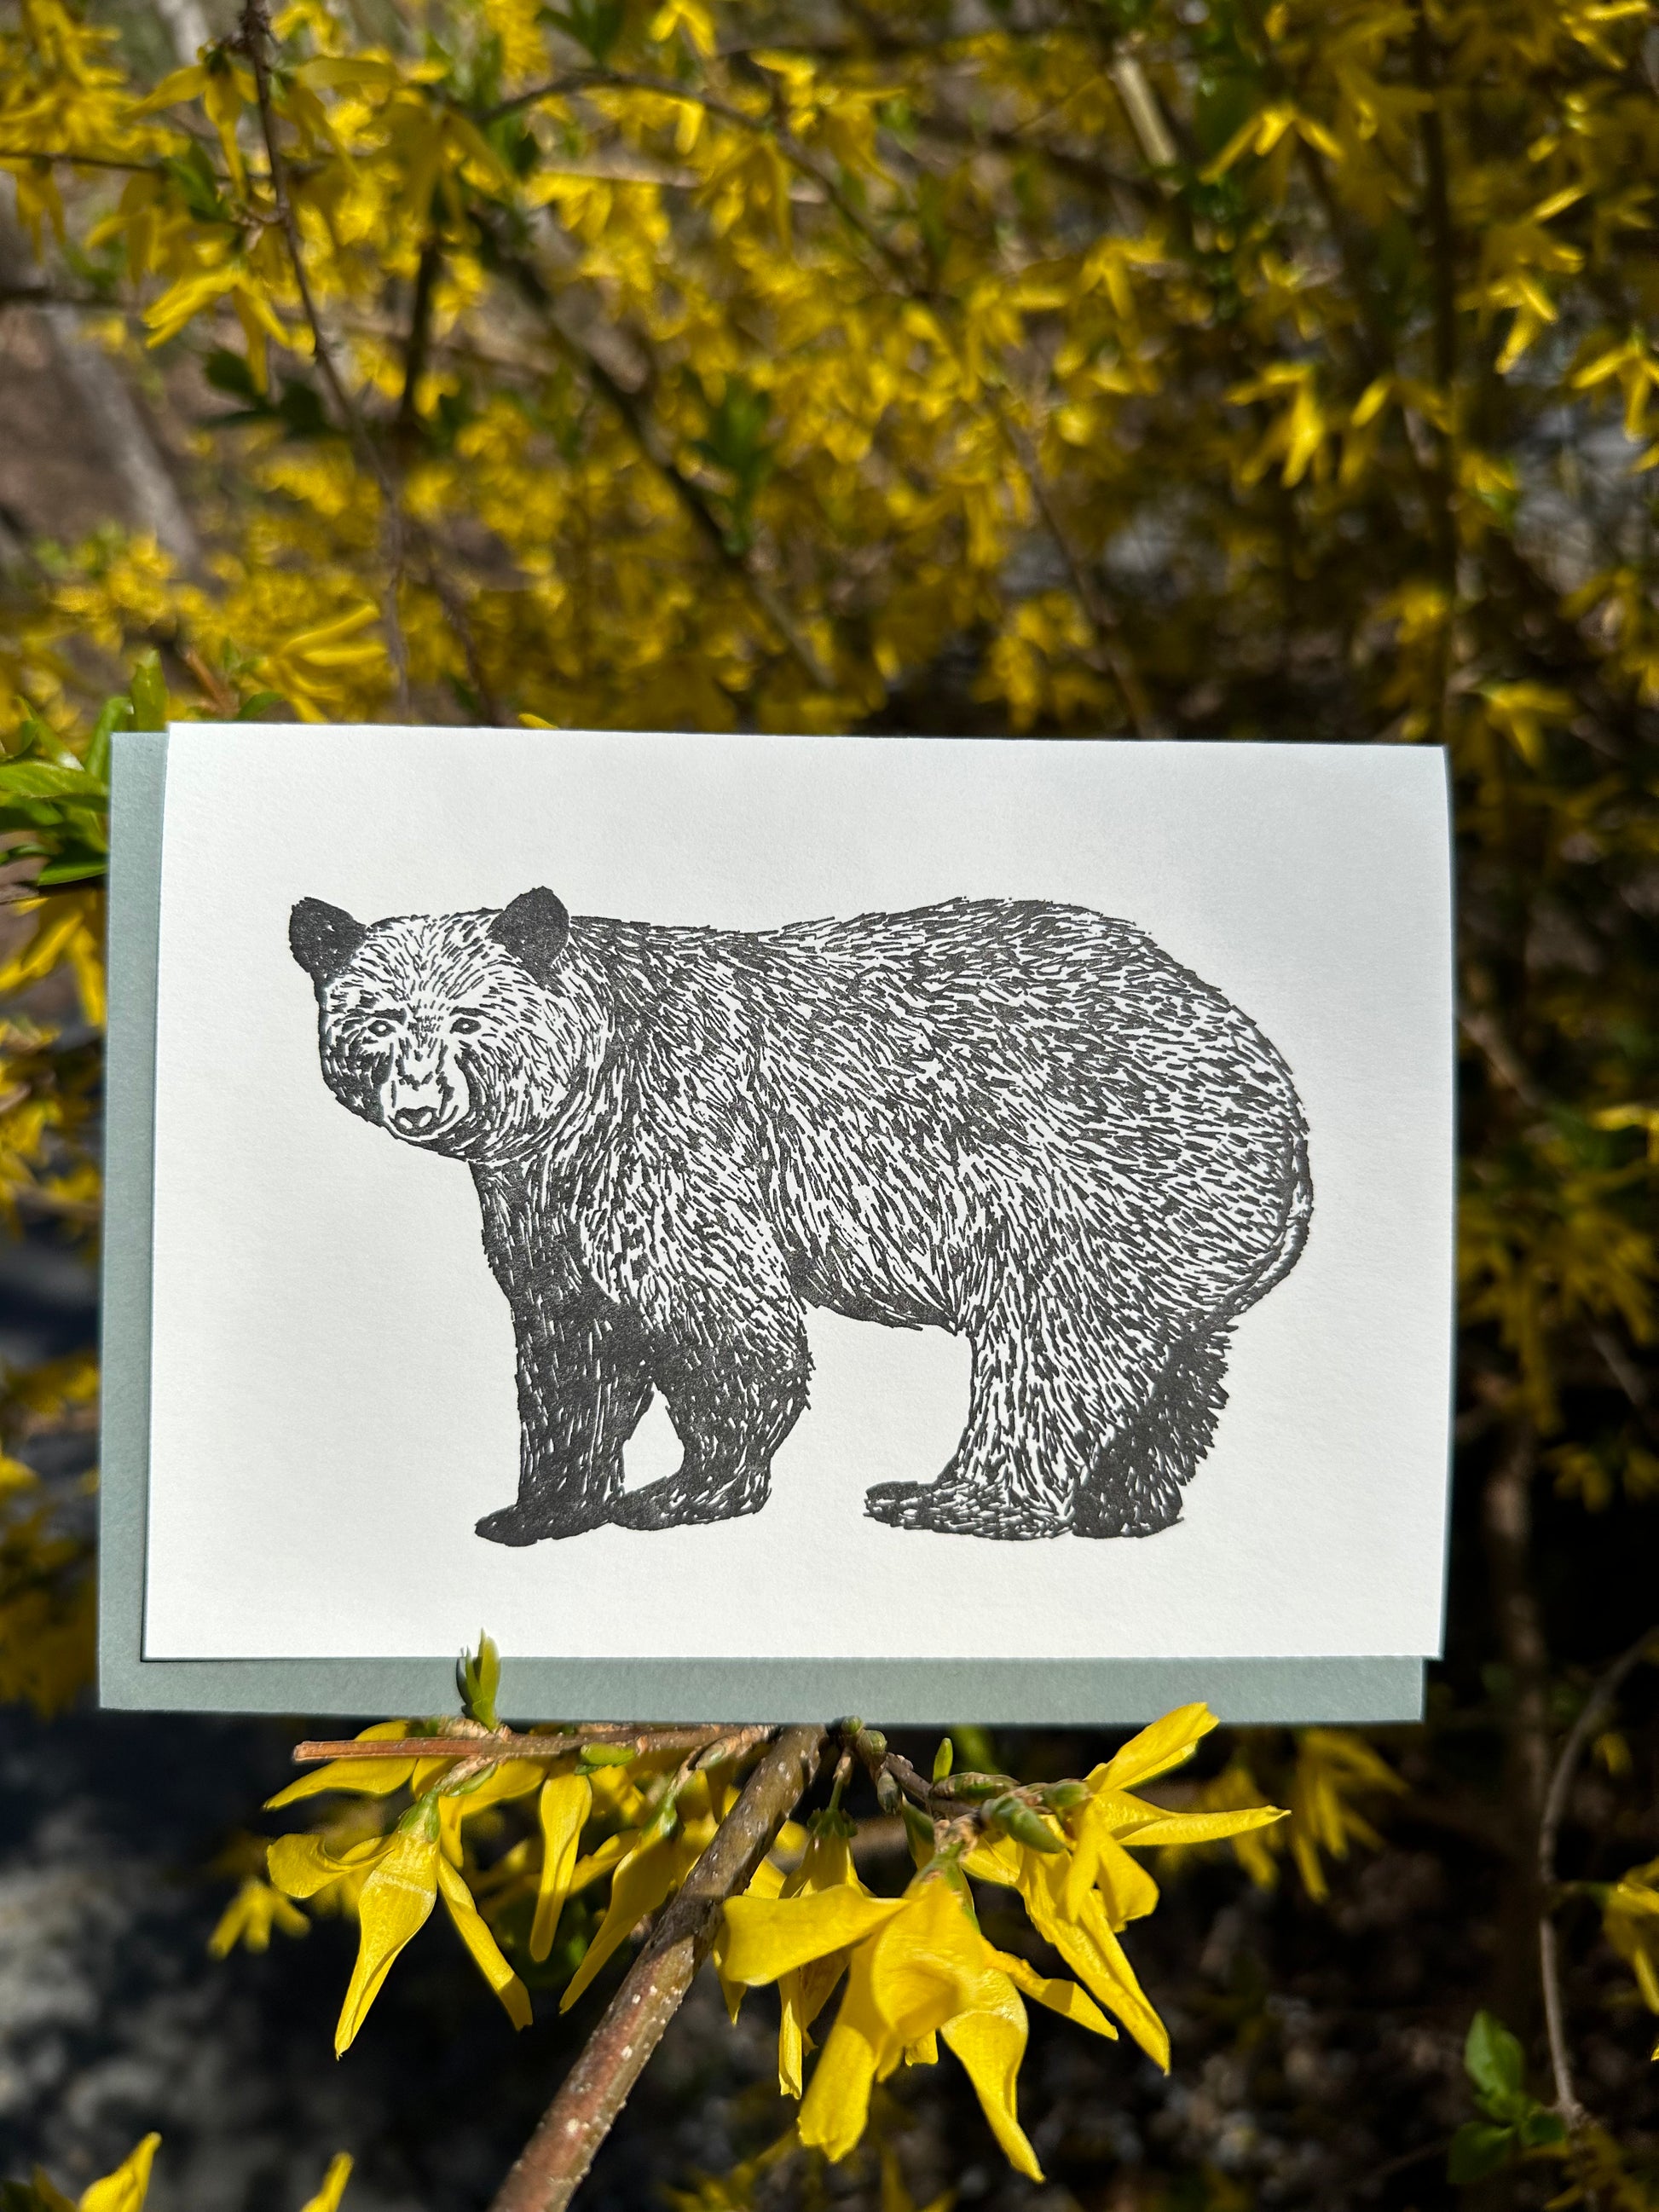 Letterpress greeting card featuring hand-drawn Appalachian Black Bear, printed in a rich black ink. There is no text on the card. The white card is 100% cotton, blank inside, and is paired with a slate gray envelope. The card is shown on a blooming forsythia bush outside on a sunny spring day.